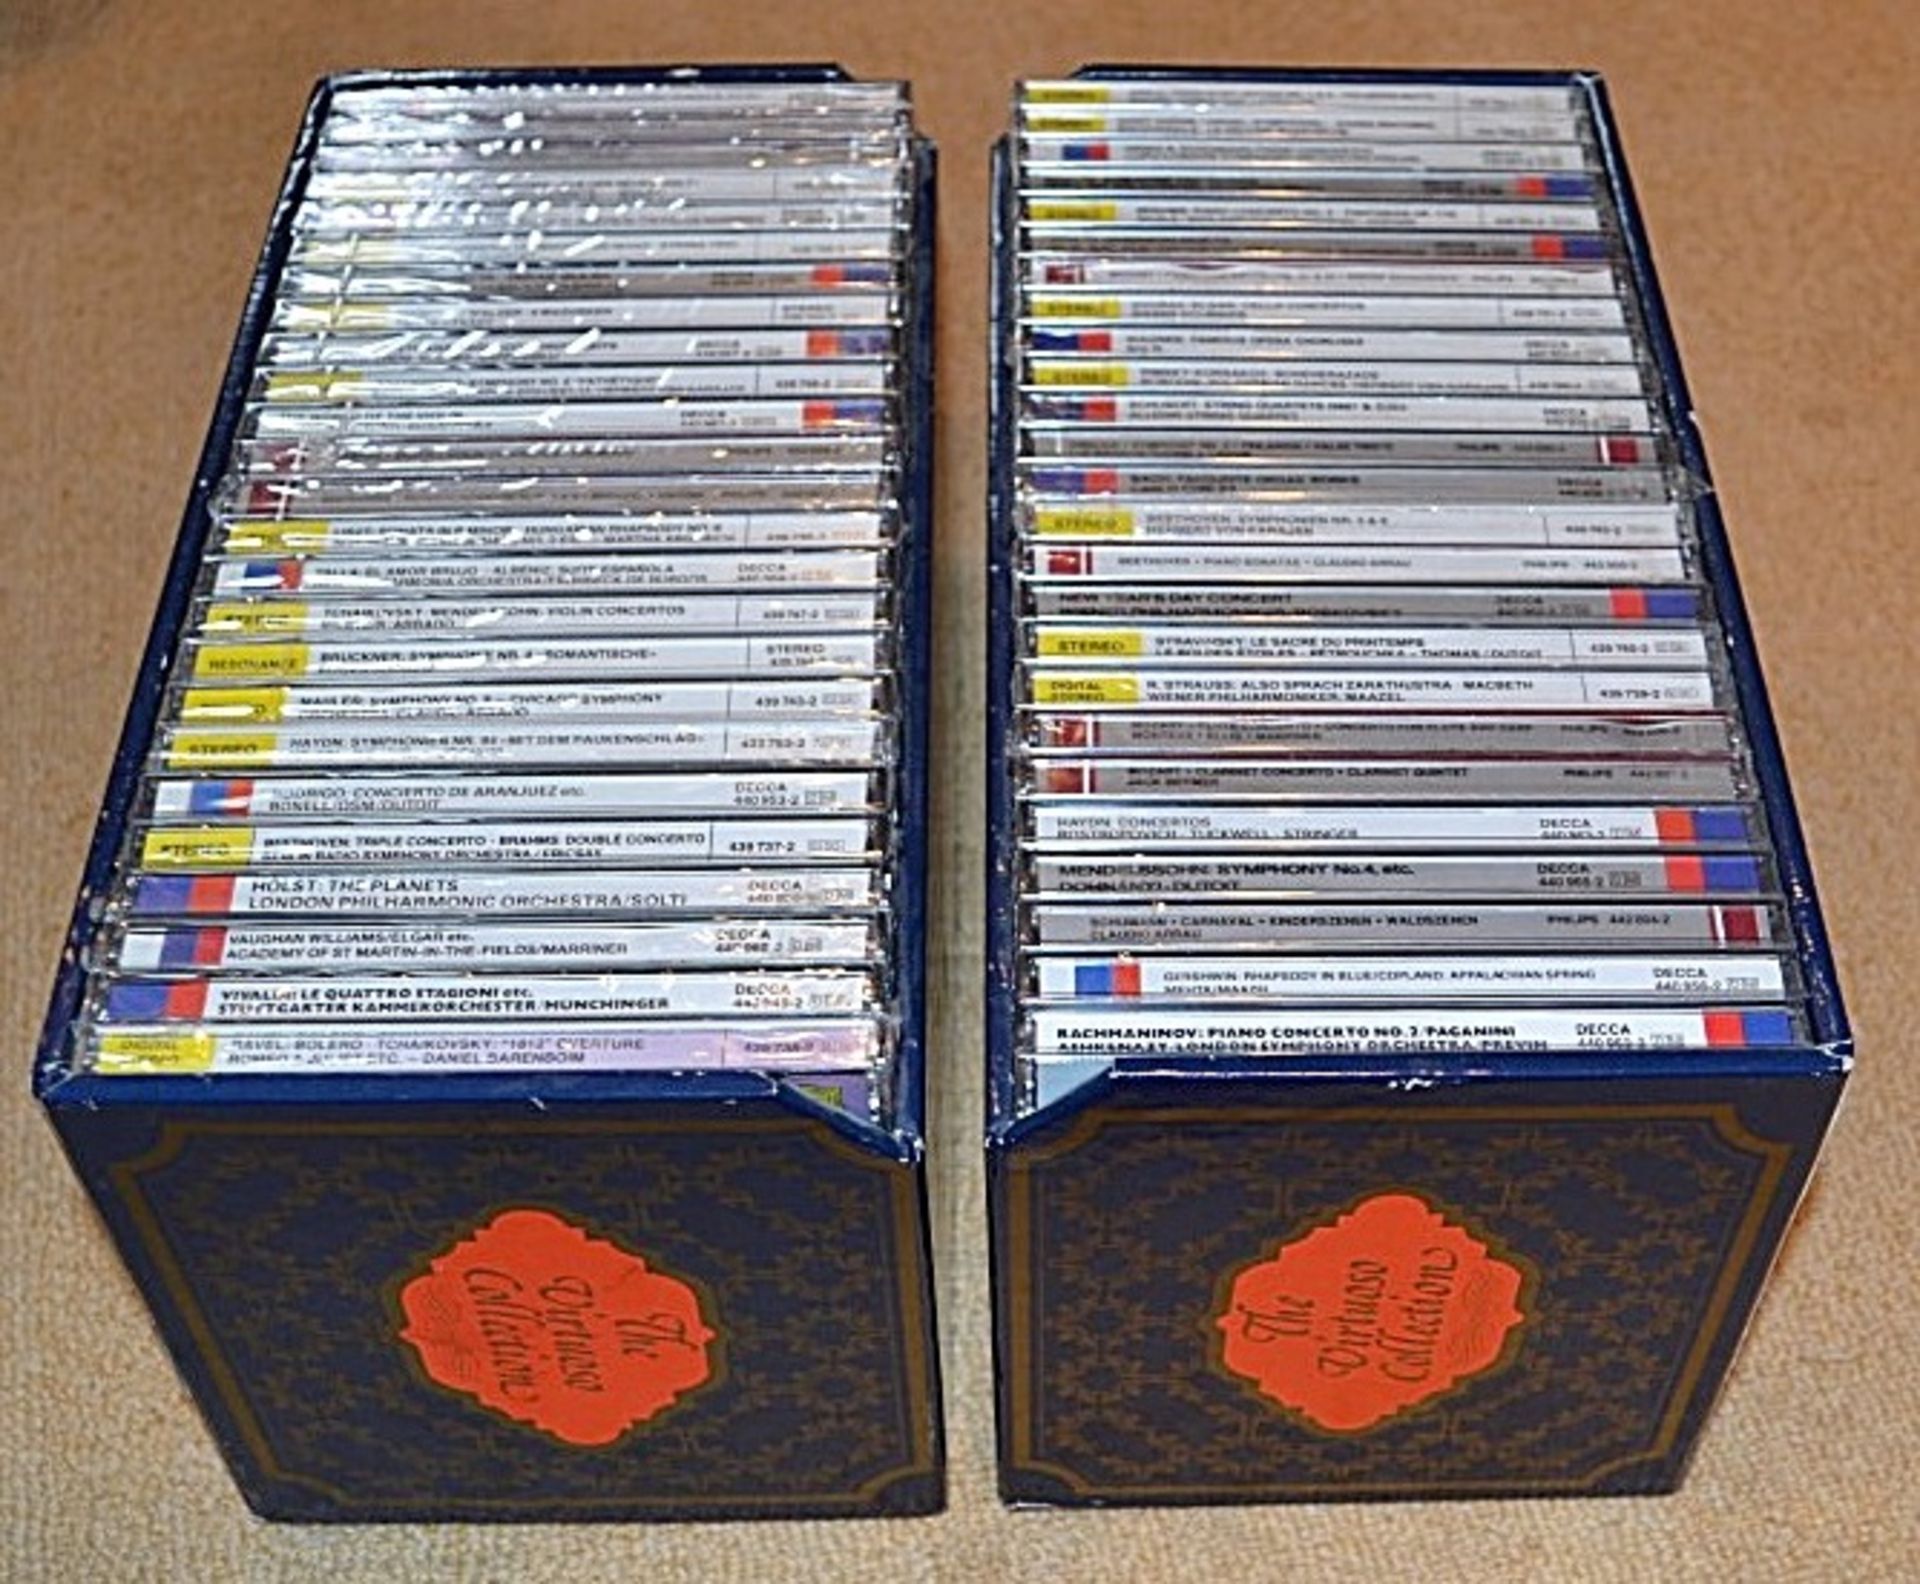 1 x Classical Music 50-CD Boxset - Supplied Over 2 Boxes, As Shown - Preowned, As New, Mostly Sealed